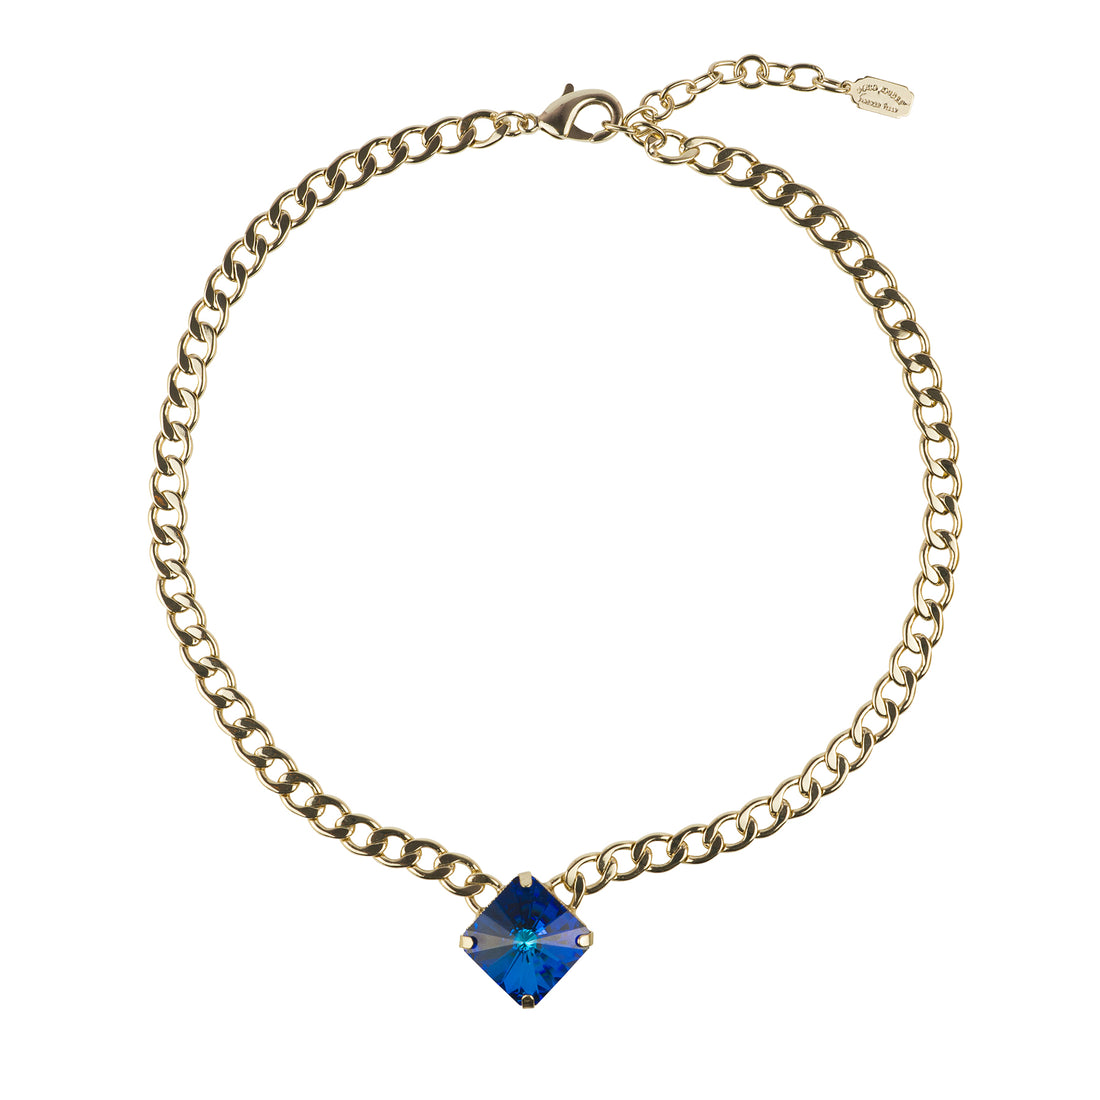 Chain choker necklace with Swarovski crystal square